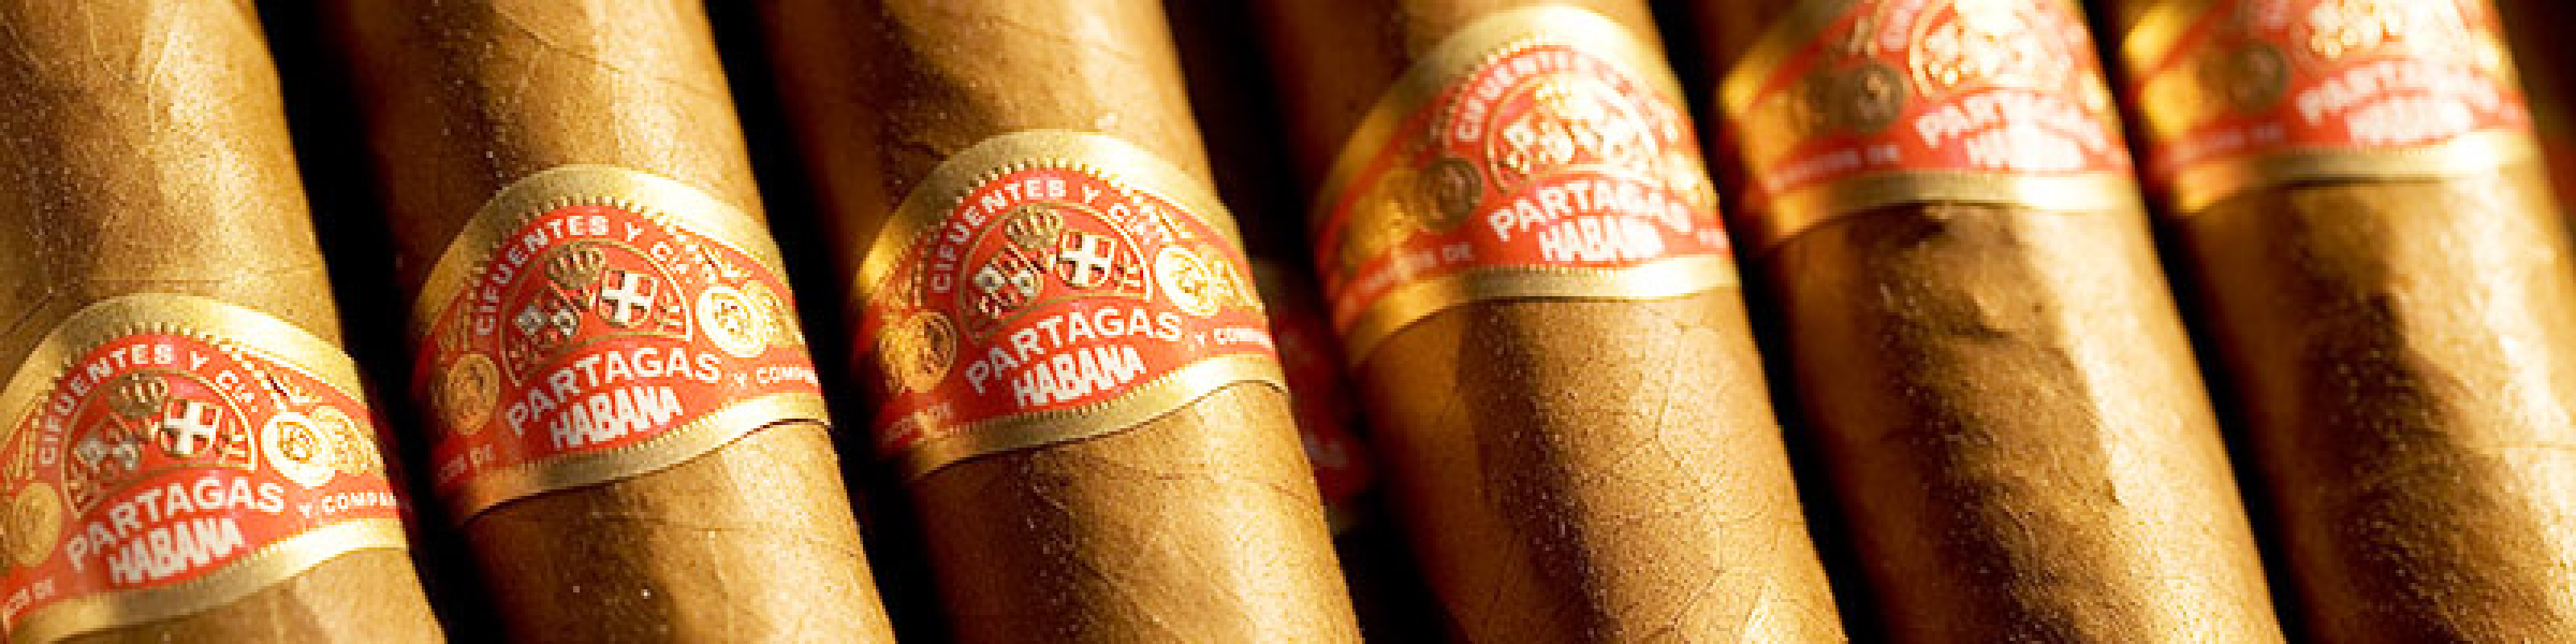 PARTAGAS CIGAR  THE SELECTION GERARD-GENEVA : THE MOST COMPLETE